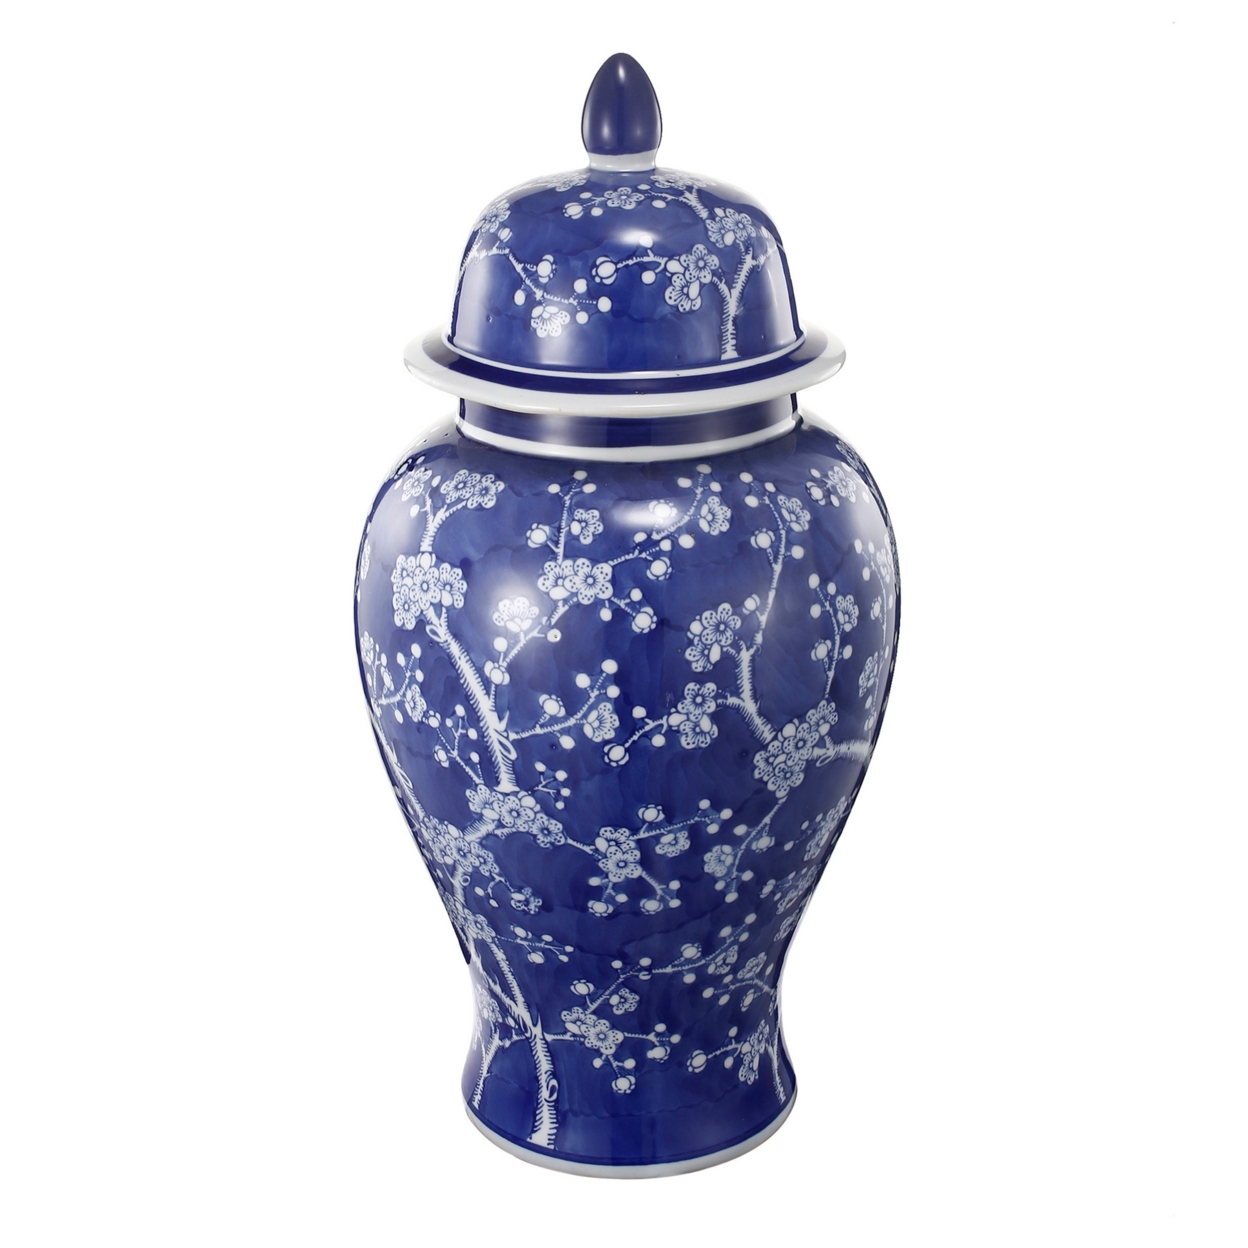 18 Inch Porcelain Ginger Jar, Finial Lid And Round Curved, Blue Flowers- Saltoro Sherpi